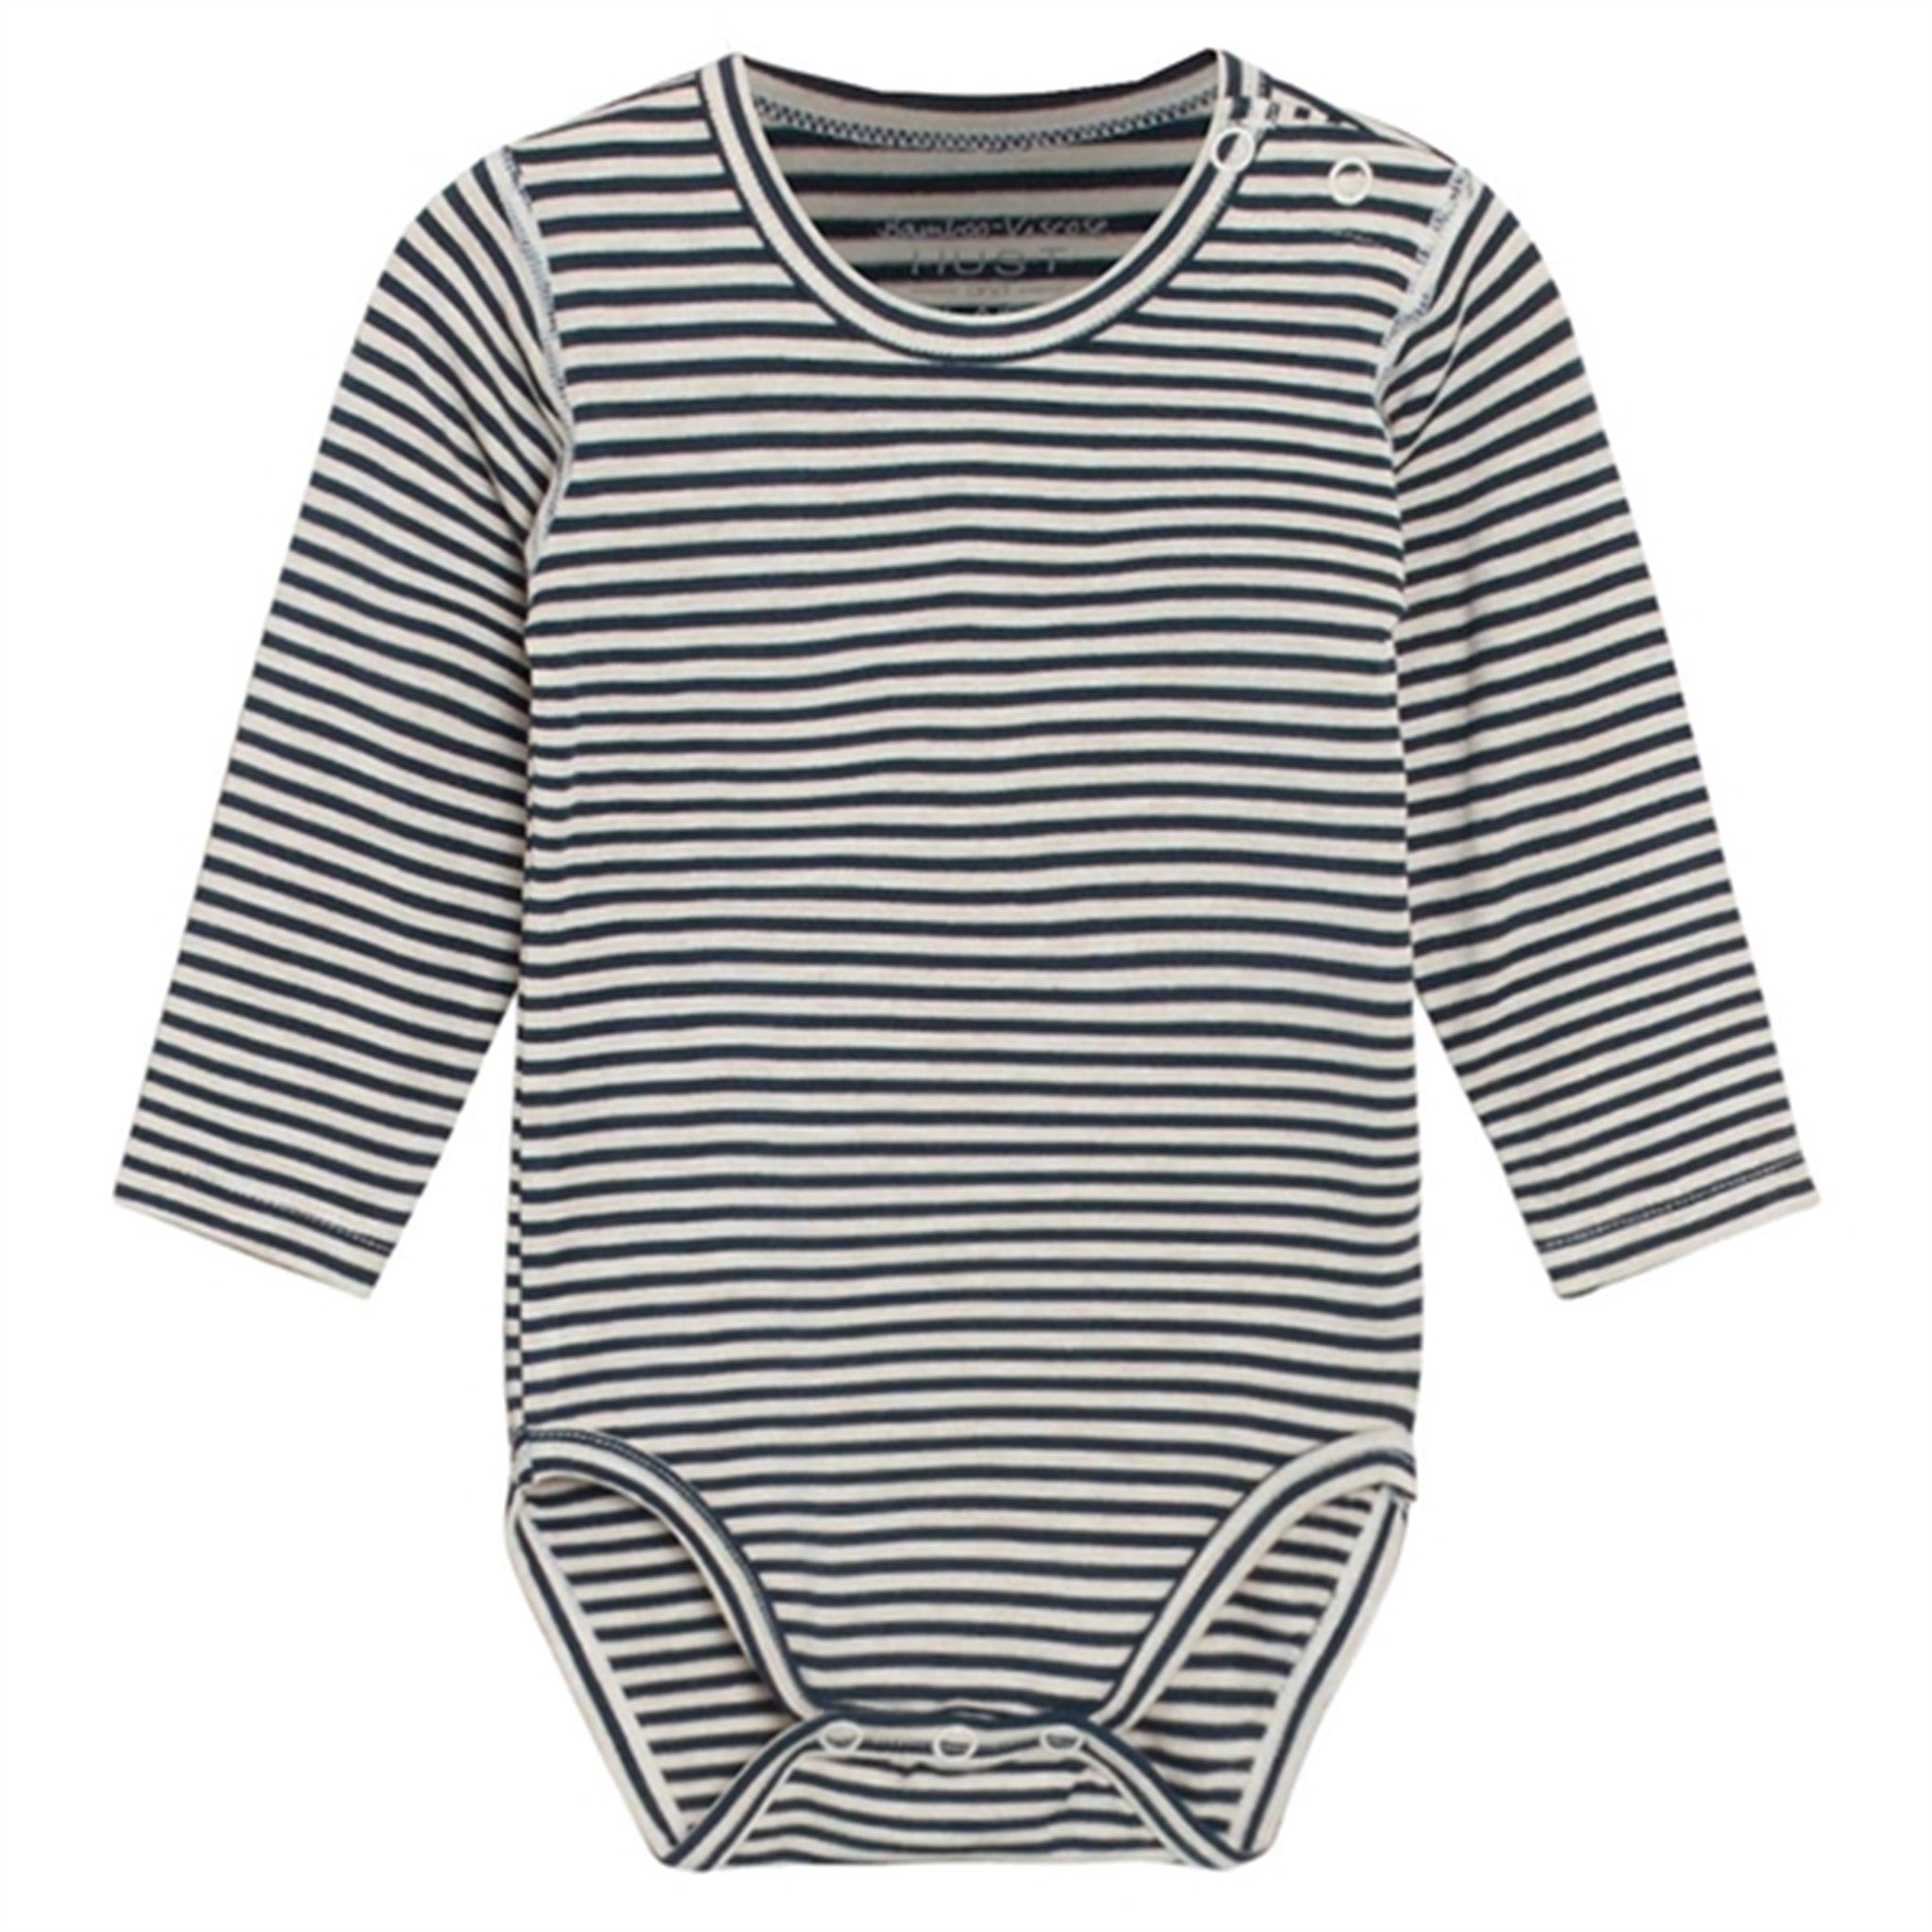 Hust & Claire Baby Stripes Blues Buller Body